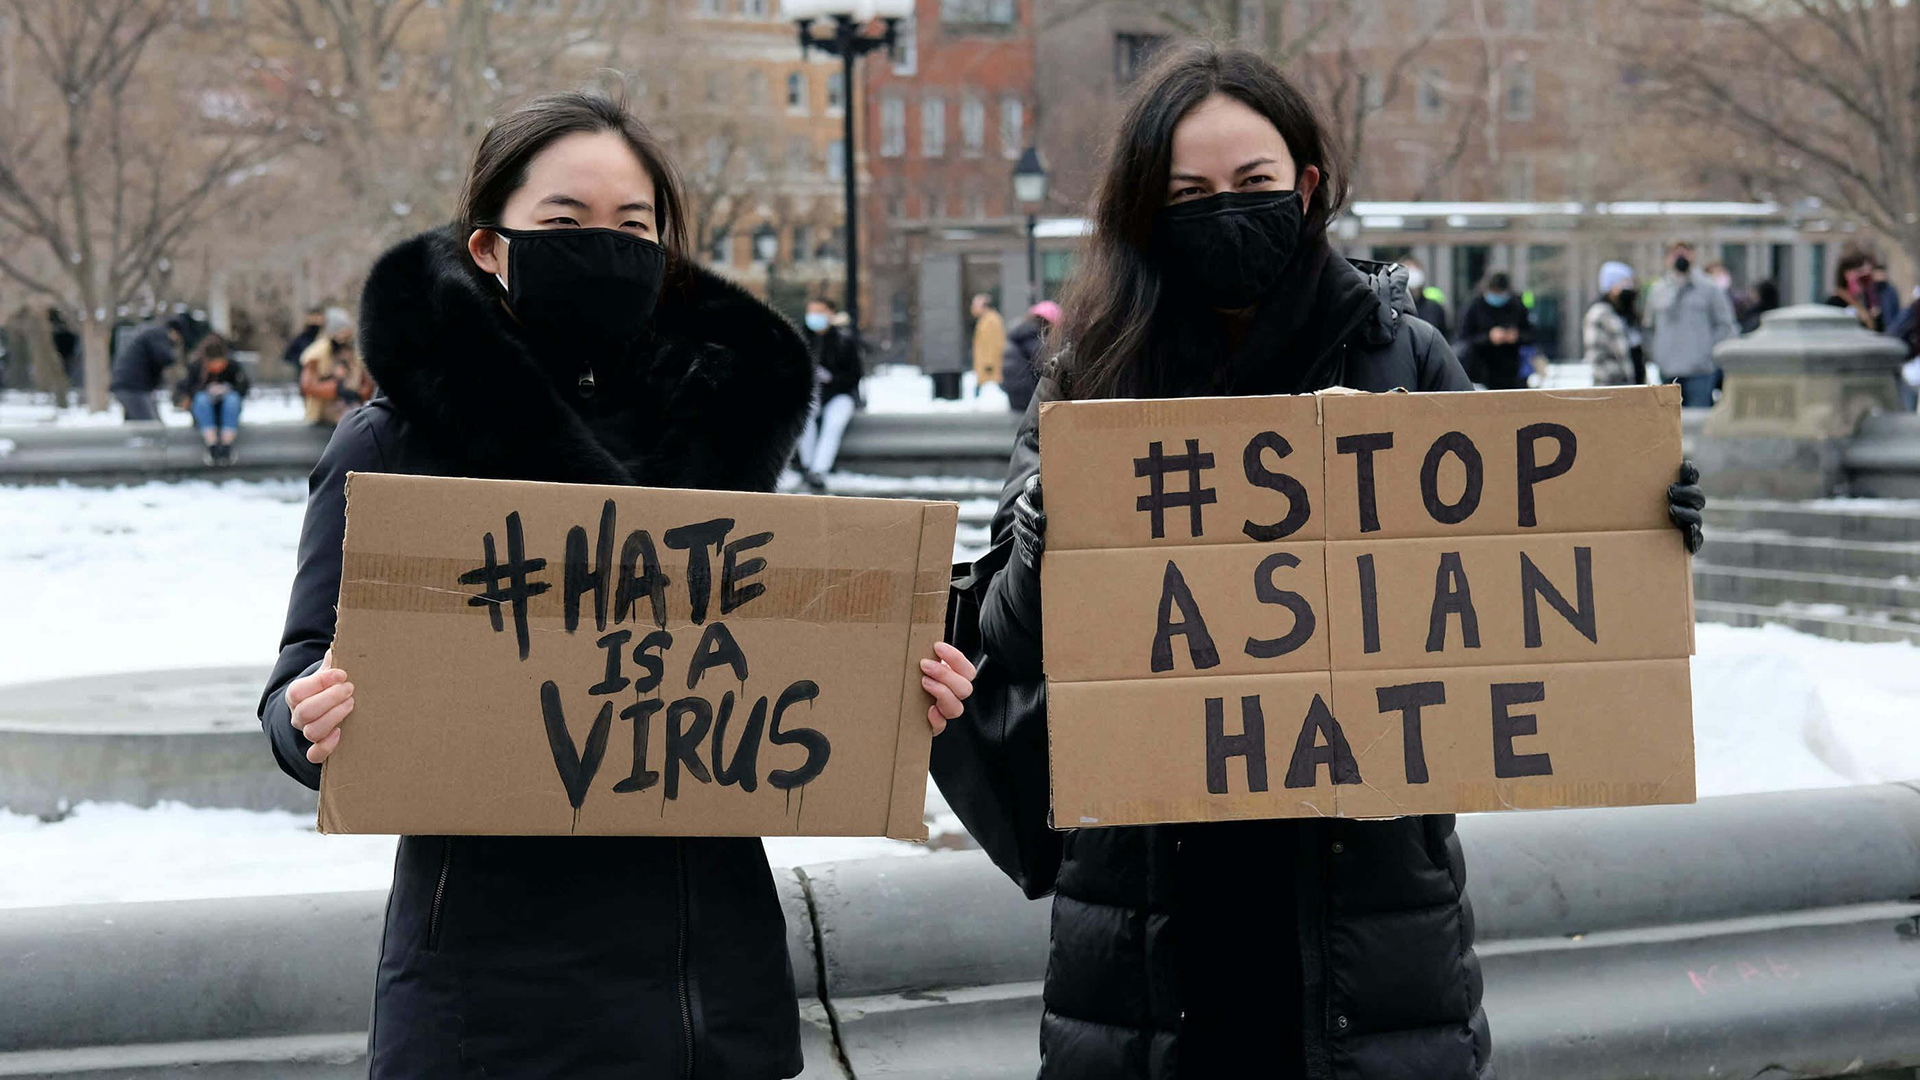 Two women stand by a fountain holding signs about stopping Asian hate